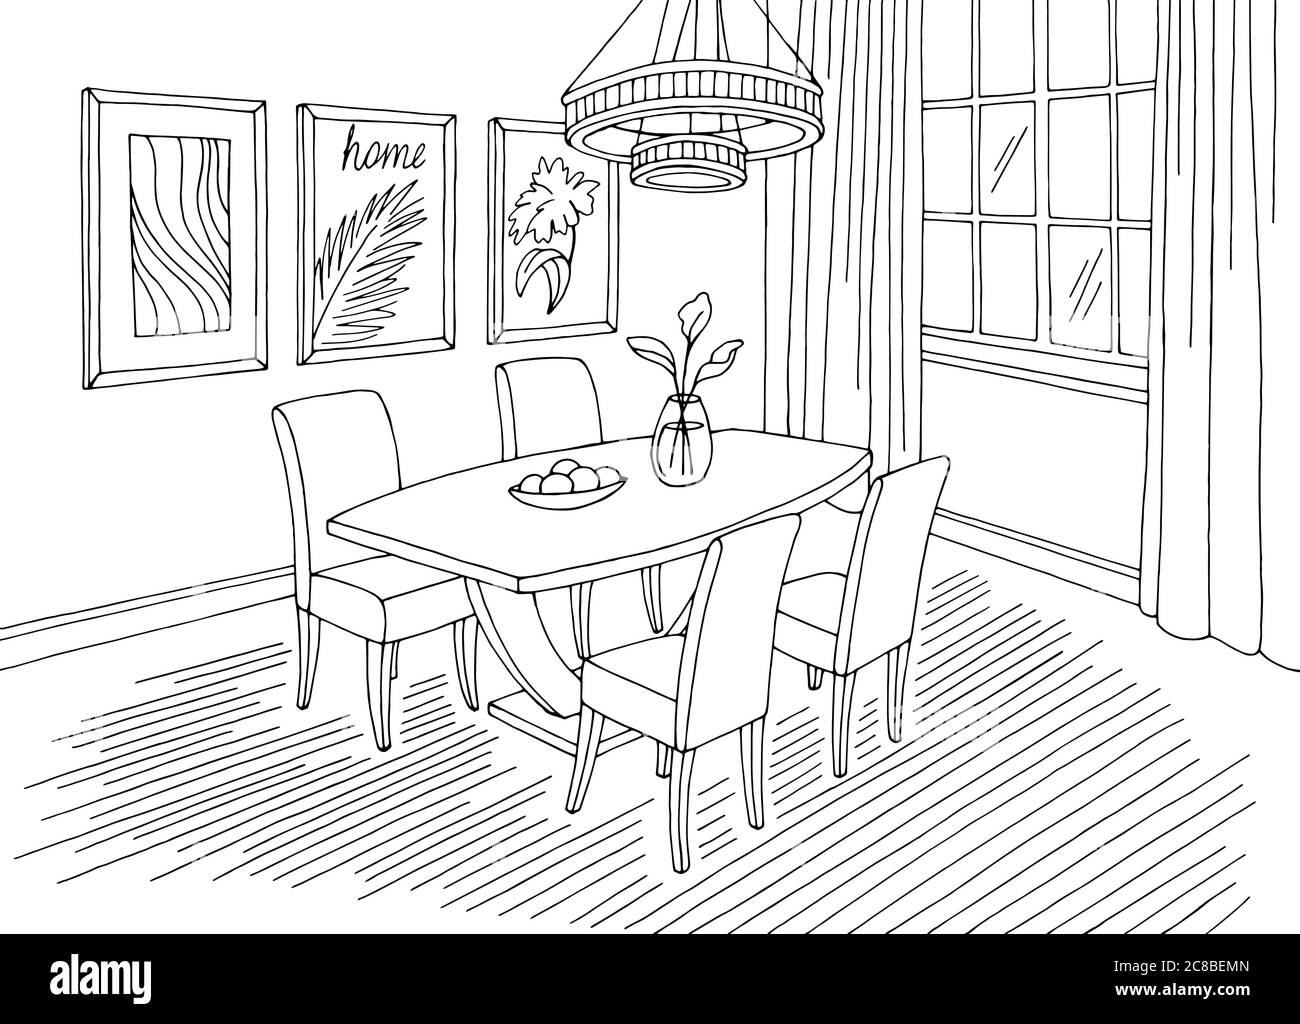 4865 Dining Room Sketch Images Stock Photos  Vectors  Shutterstock